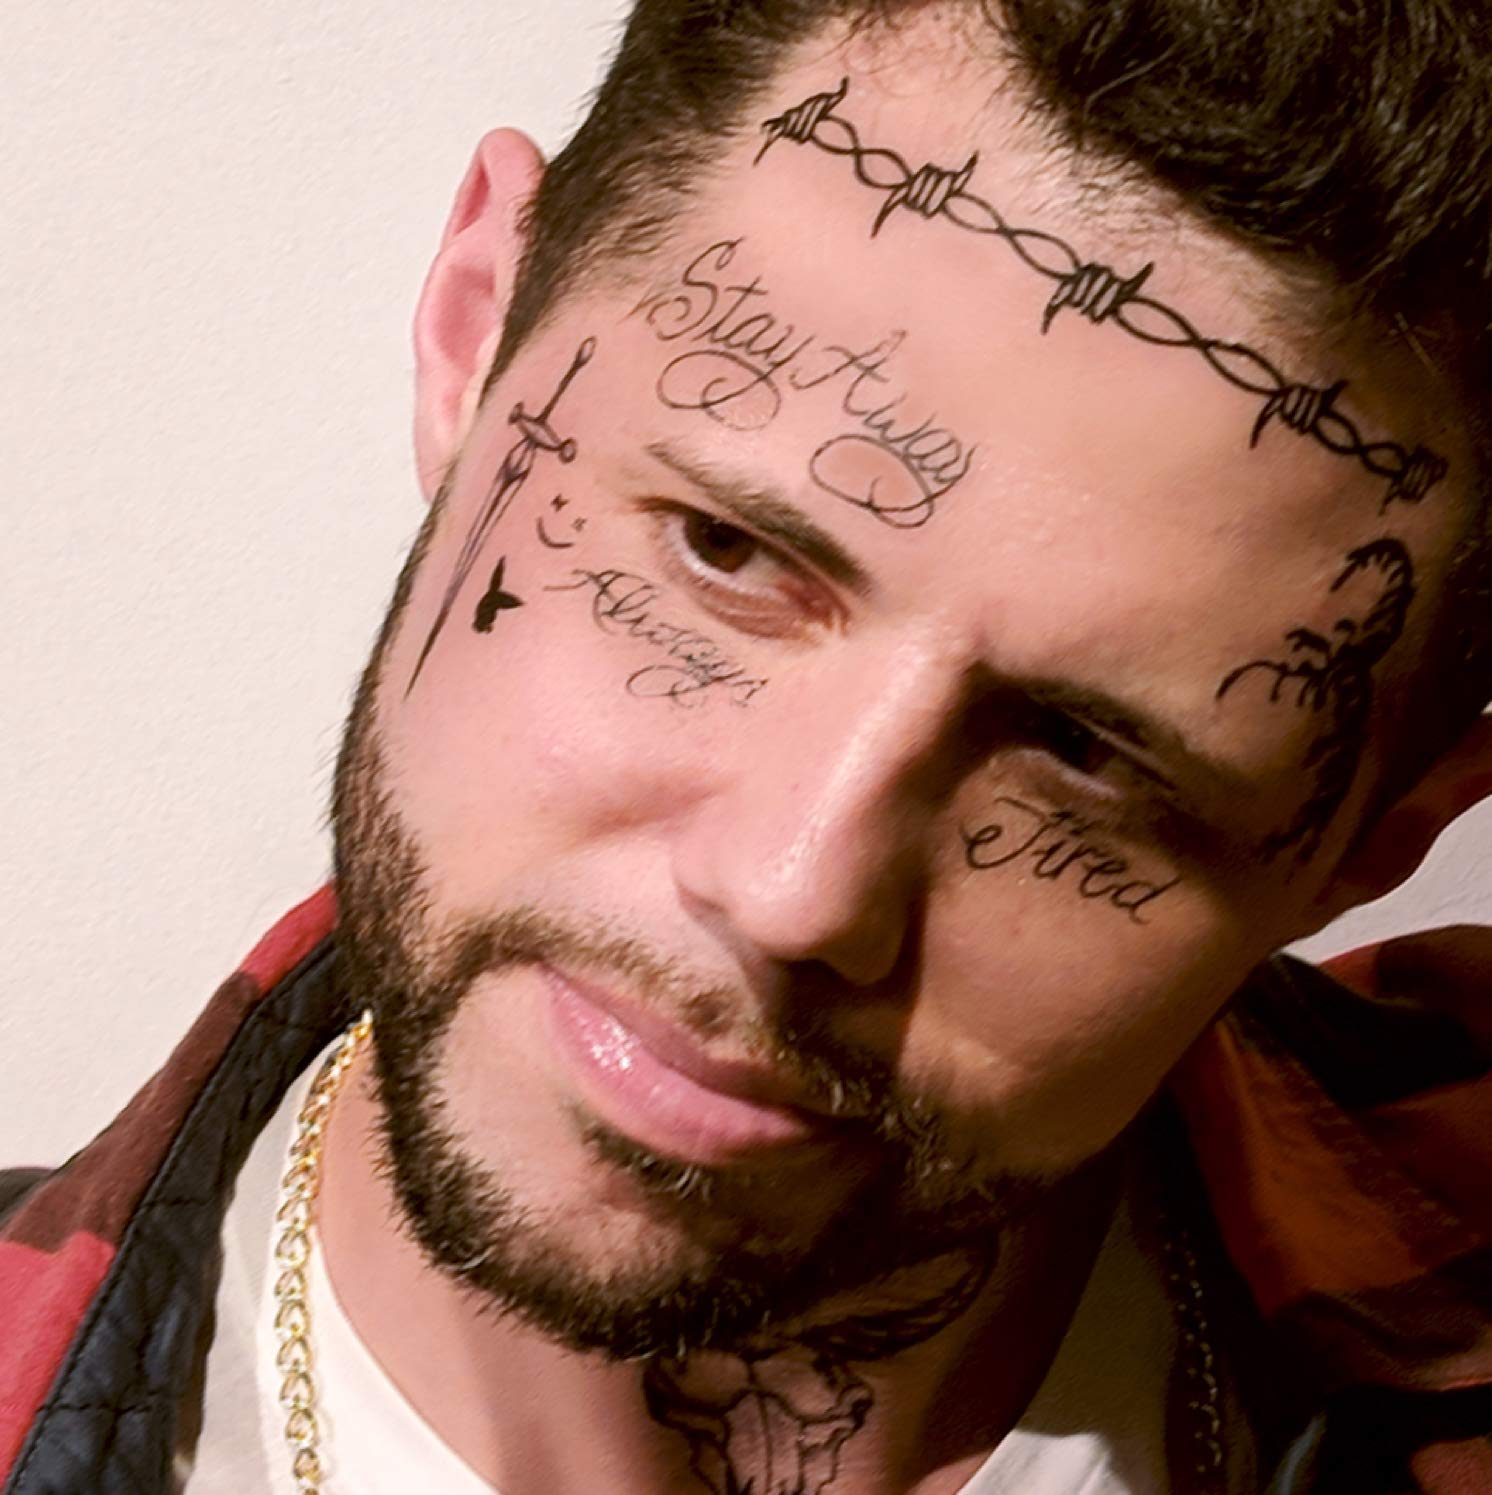 Post Malone Face Tattoo Always Tired 2020.